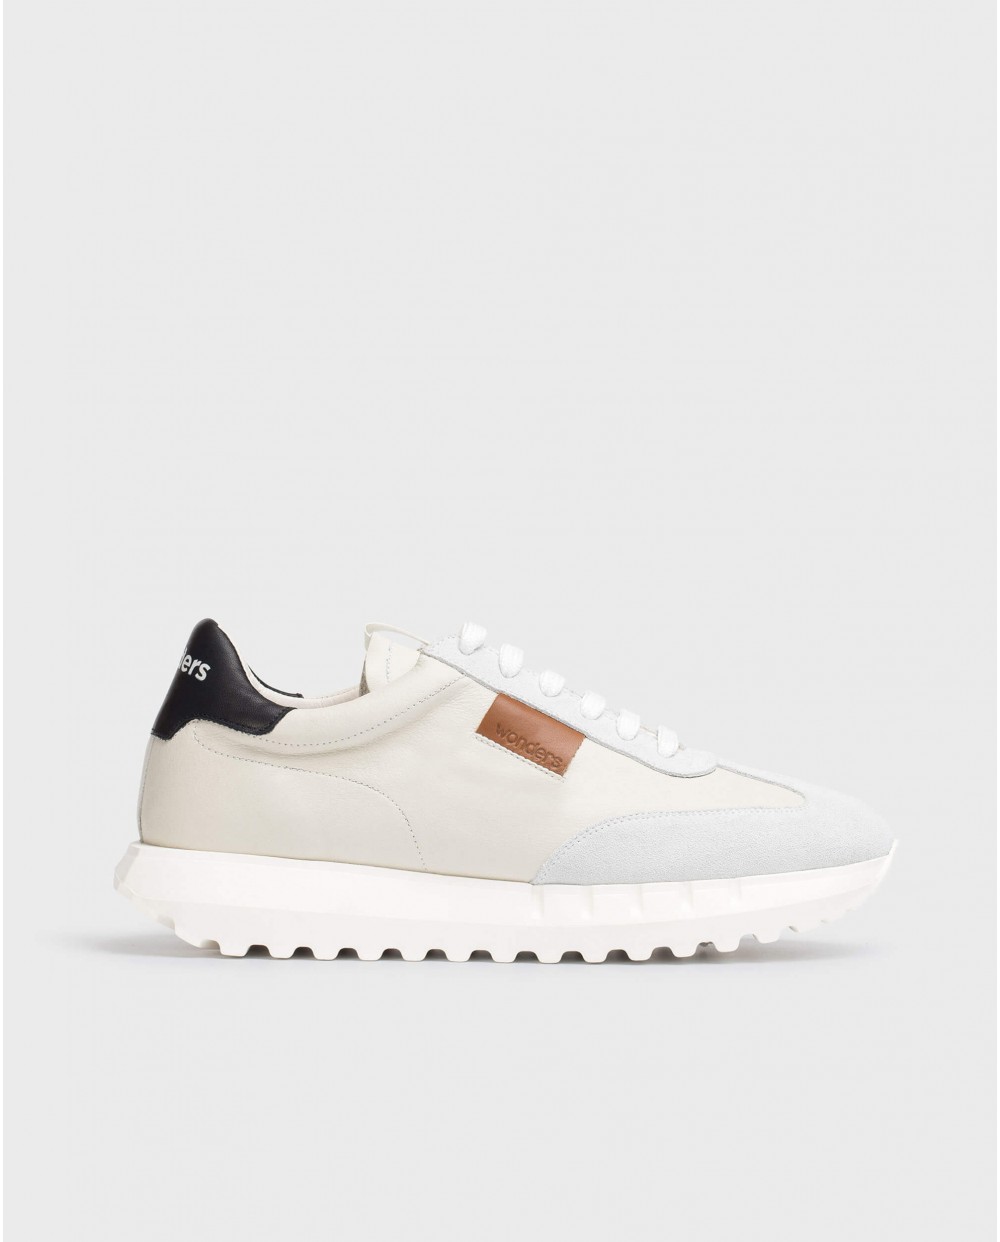 Wonders-Winter Outlet-Two-tone Leather Sneakers